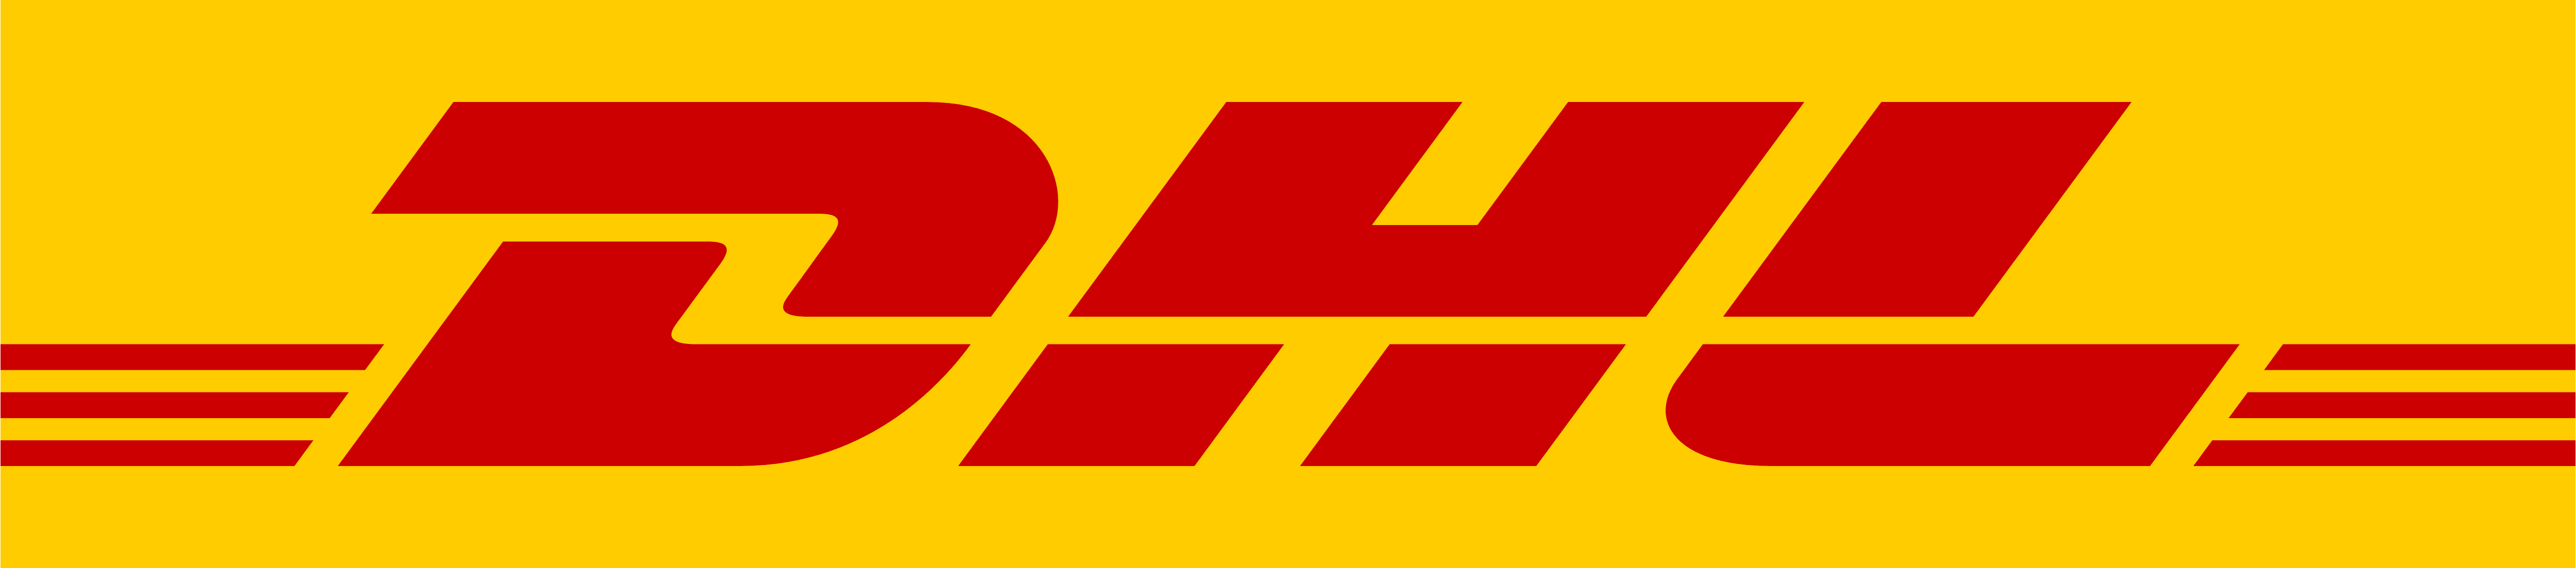 DHL | EAG Recycling